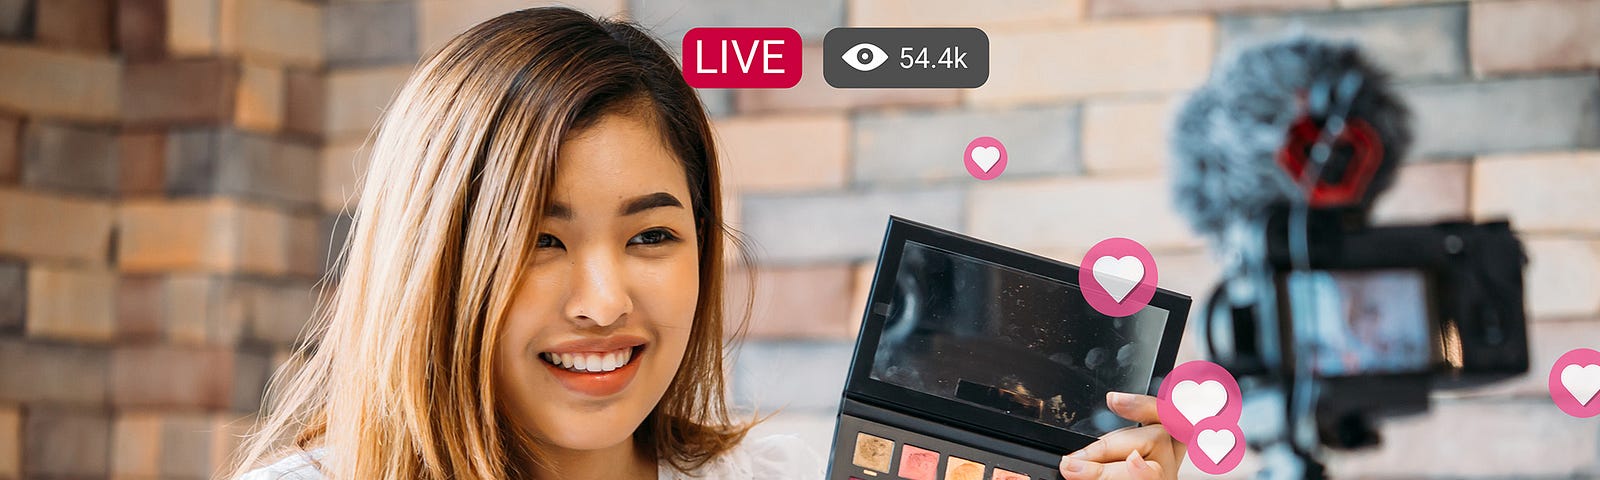 Young girl showing makeup kit while live streaming to audience on social media